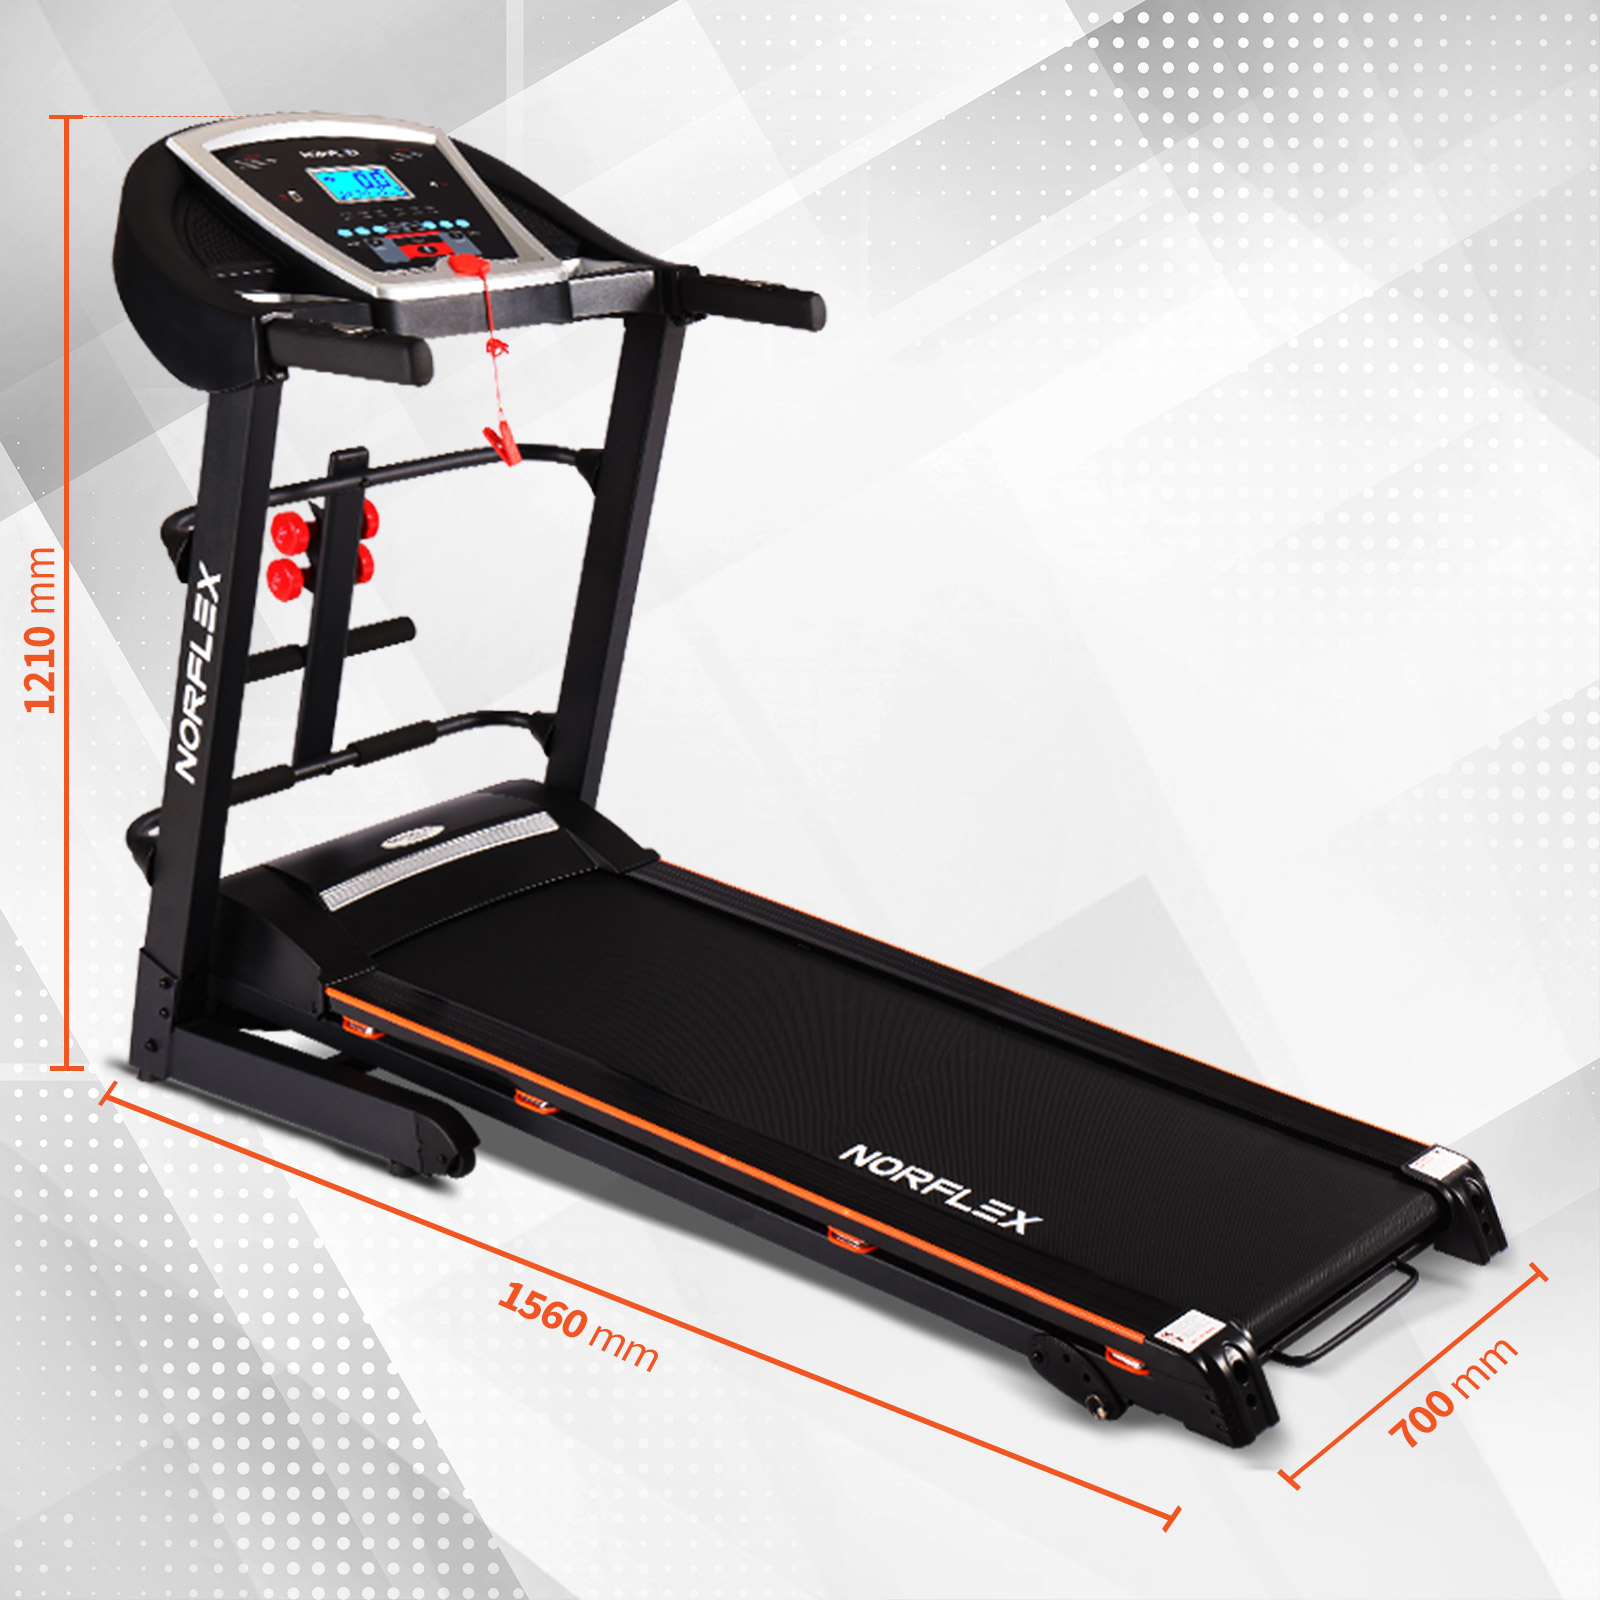 NORFLX Electric Treadmill Incline Home Gym Exercise Machine Fitness Equipment